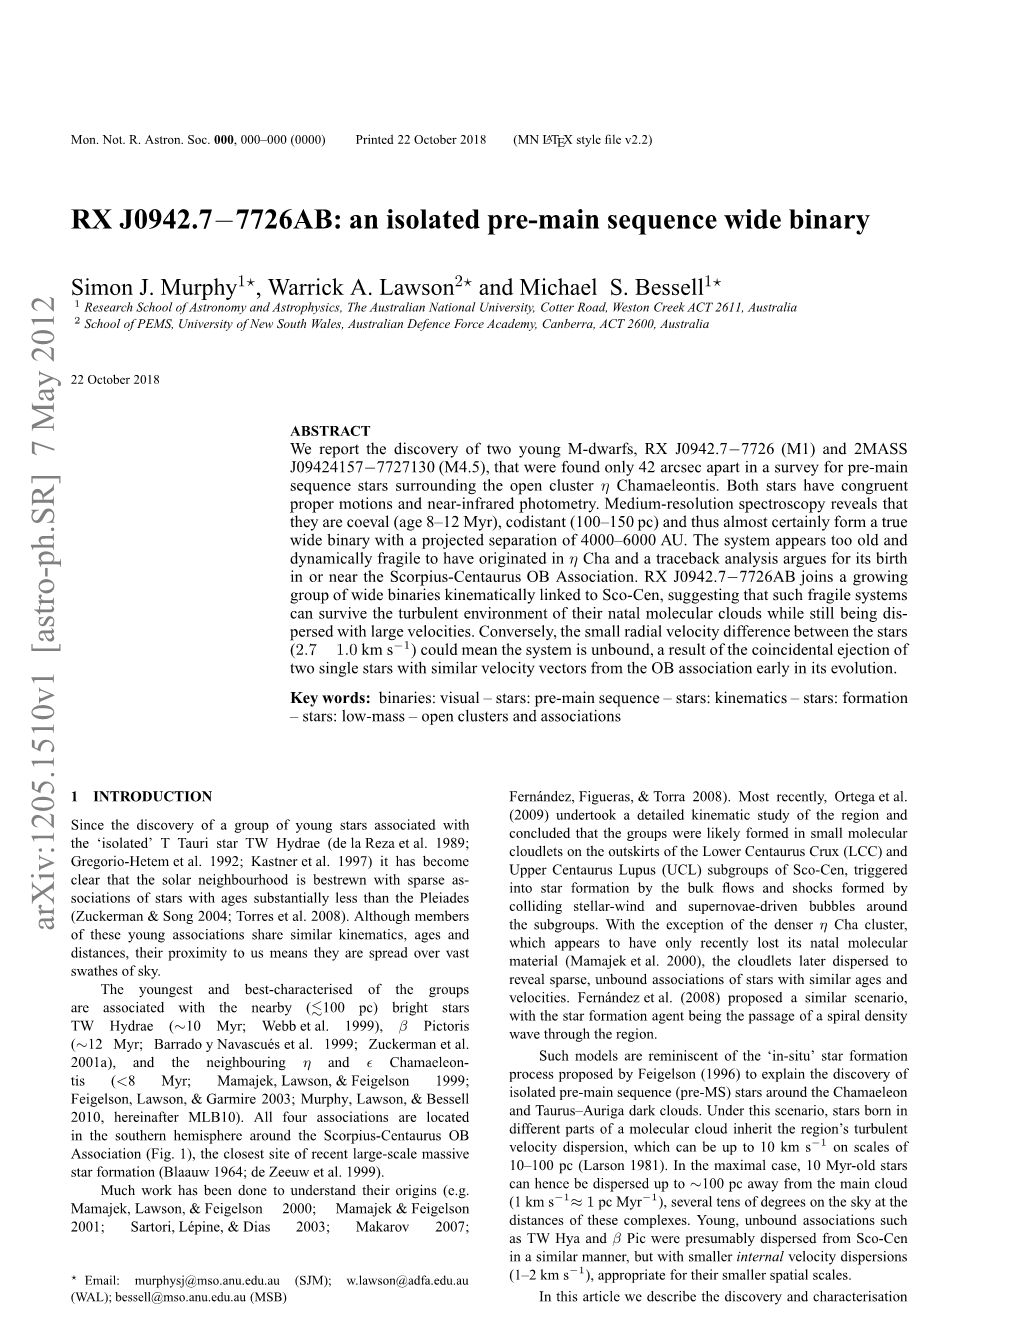 RX J0942. 7-7726AB: an Isolated Pre-Main Sequence Wide Binary